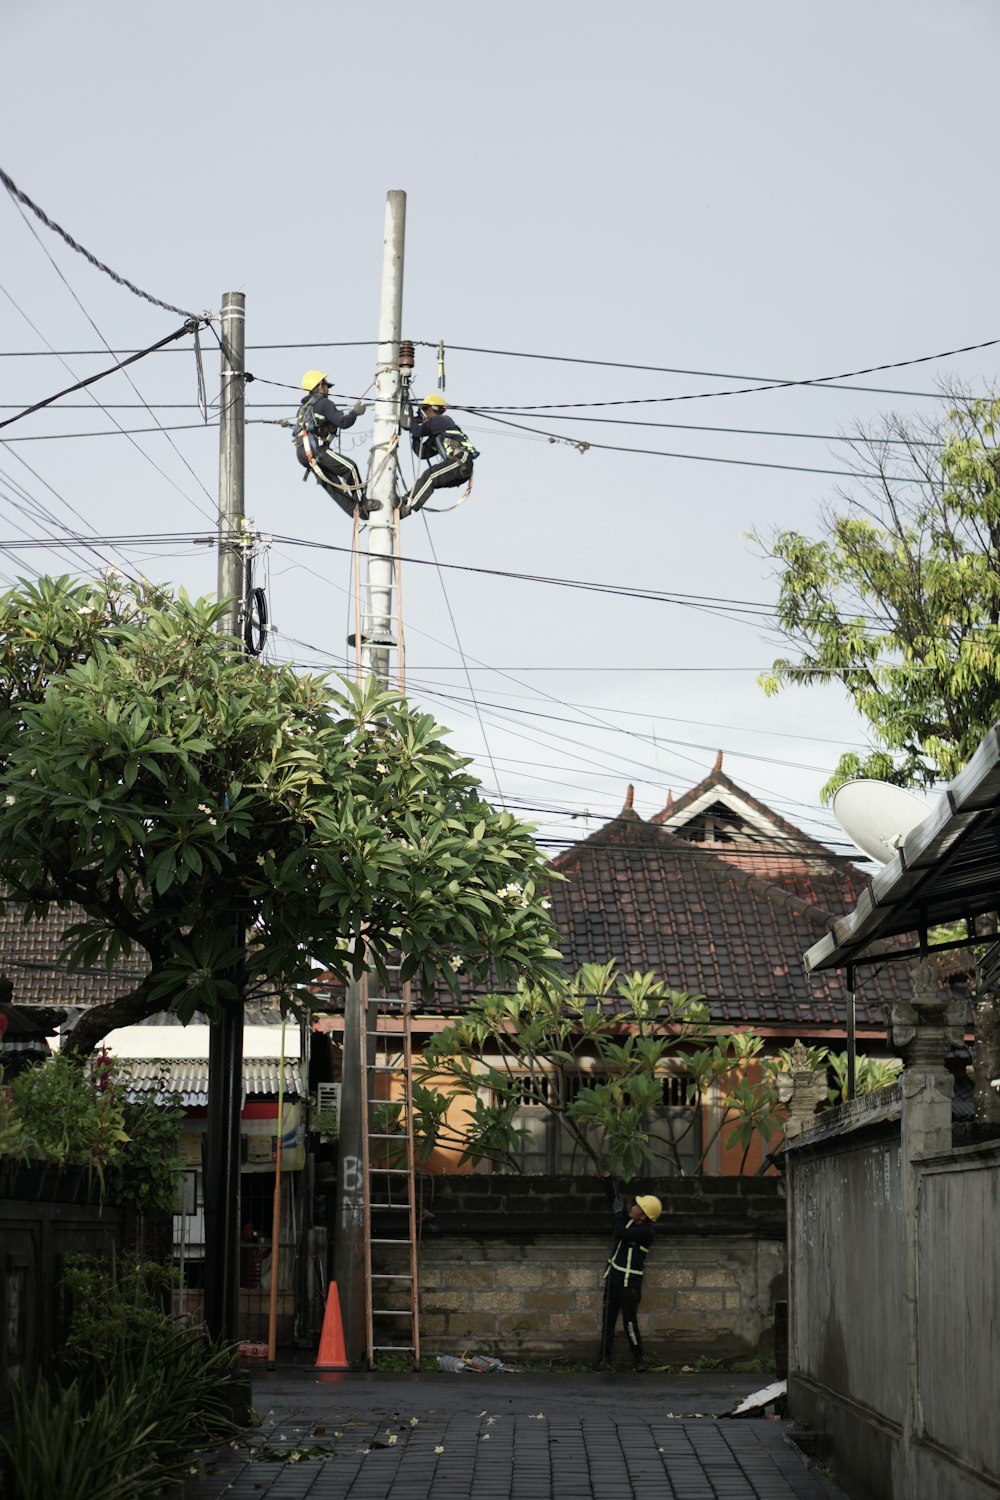 a man on a ladder working on a power line